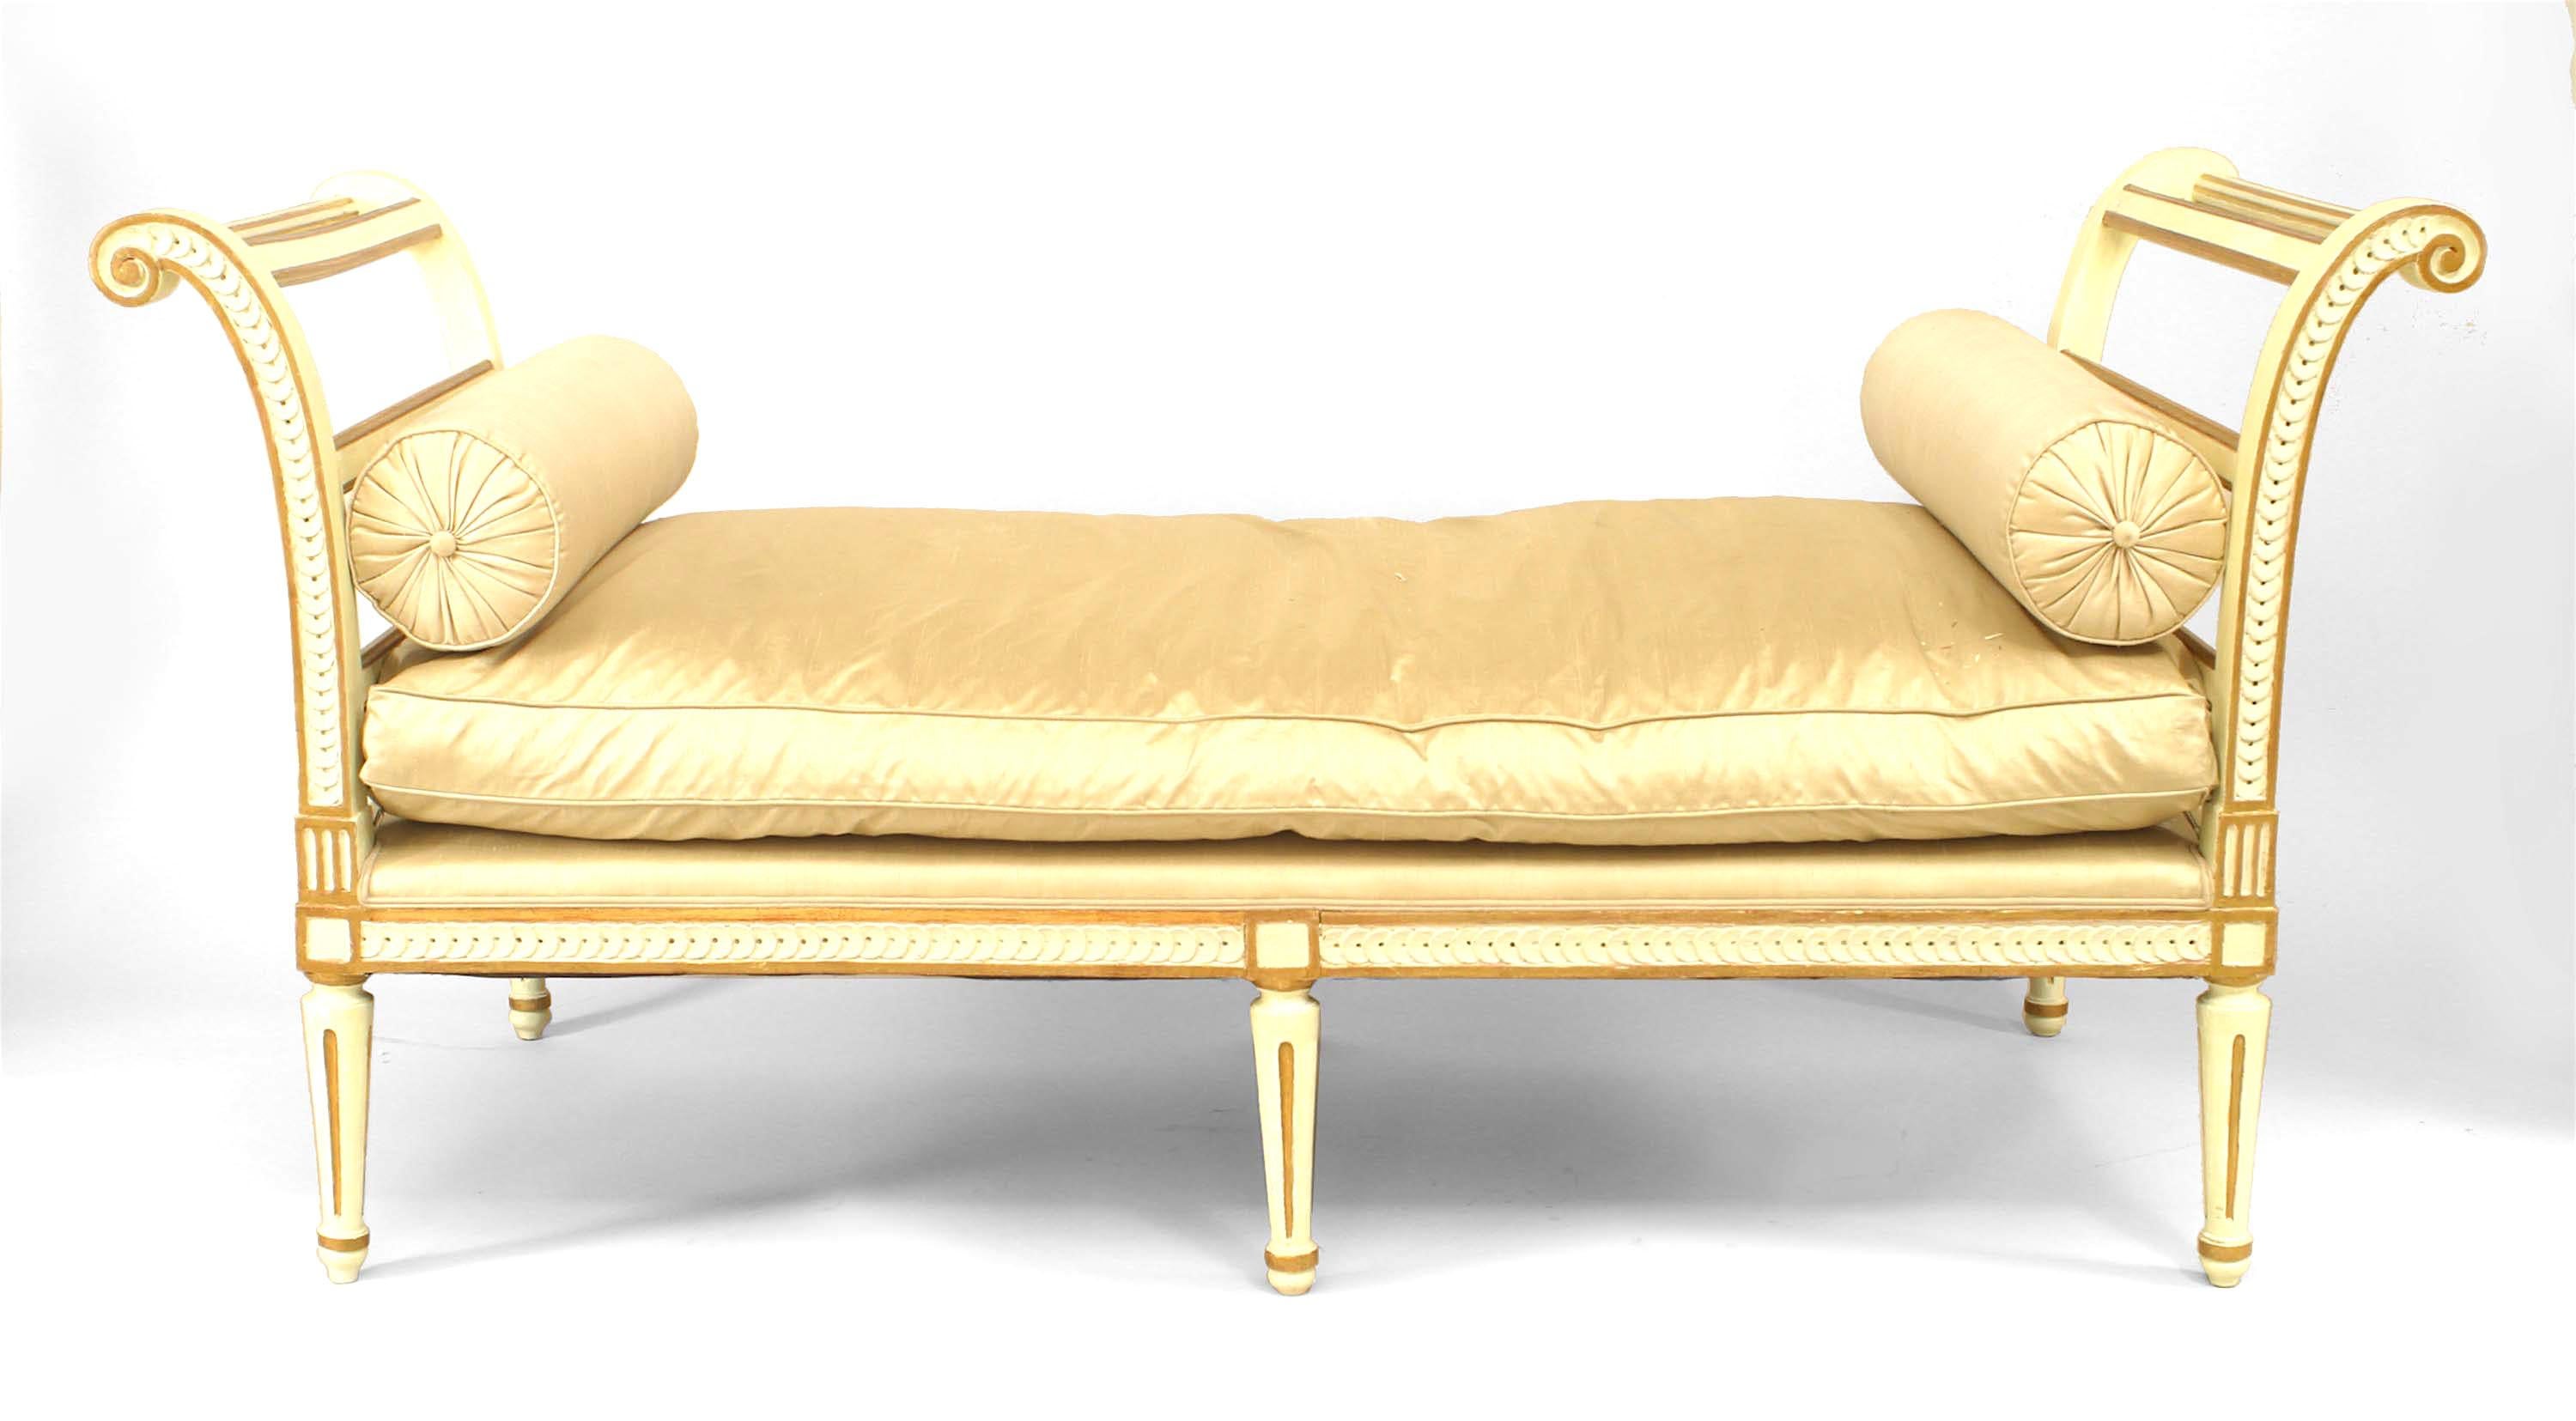 Italian Neo-classic-style (19th Century) white painted daybed / bench with gilt trim and scroll design side arms and upholstered seat cushion.
